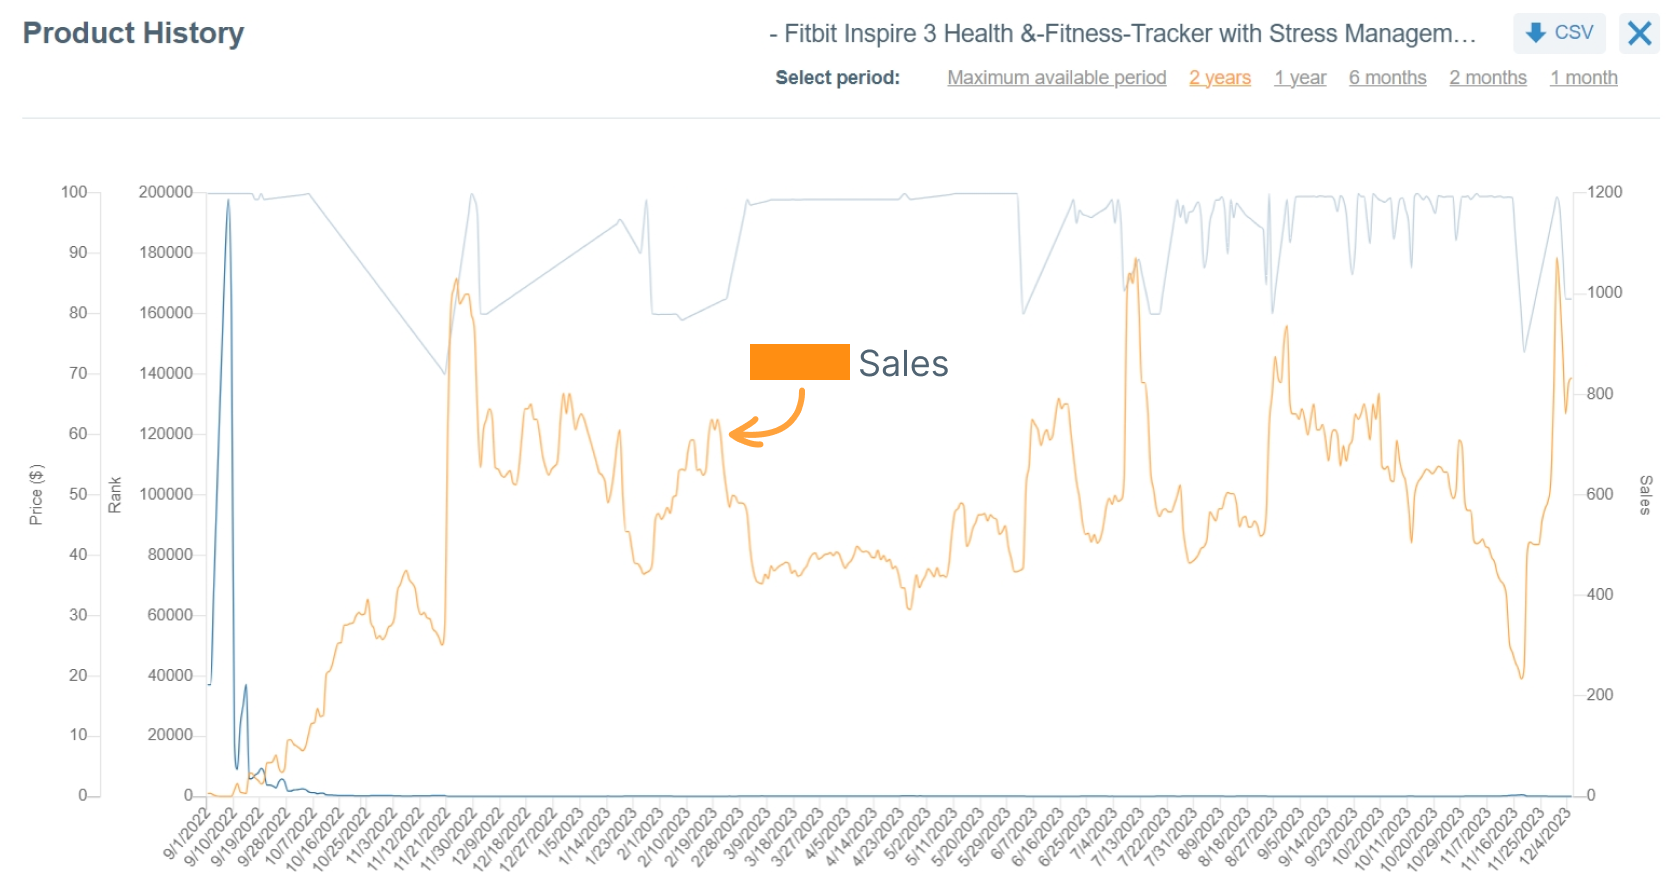 Product History of the Fitness-Tracker